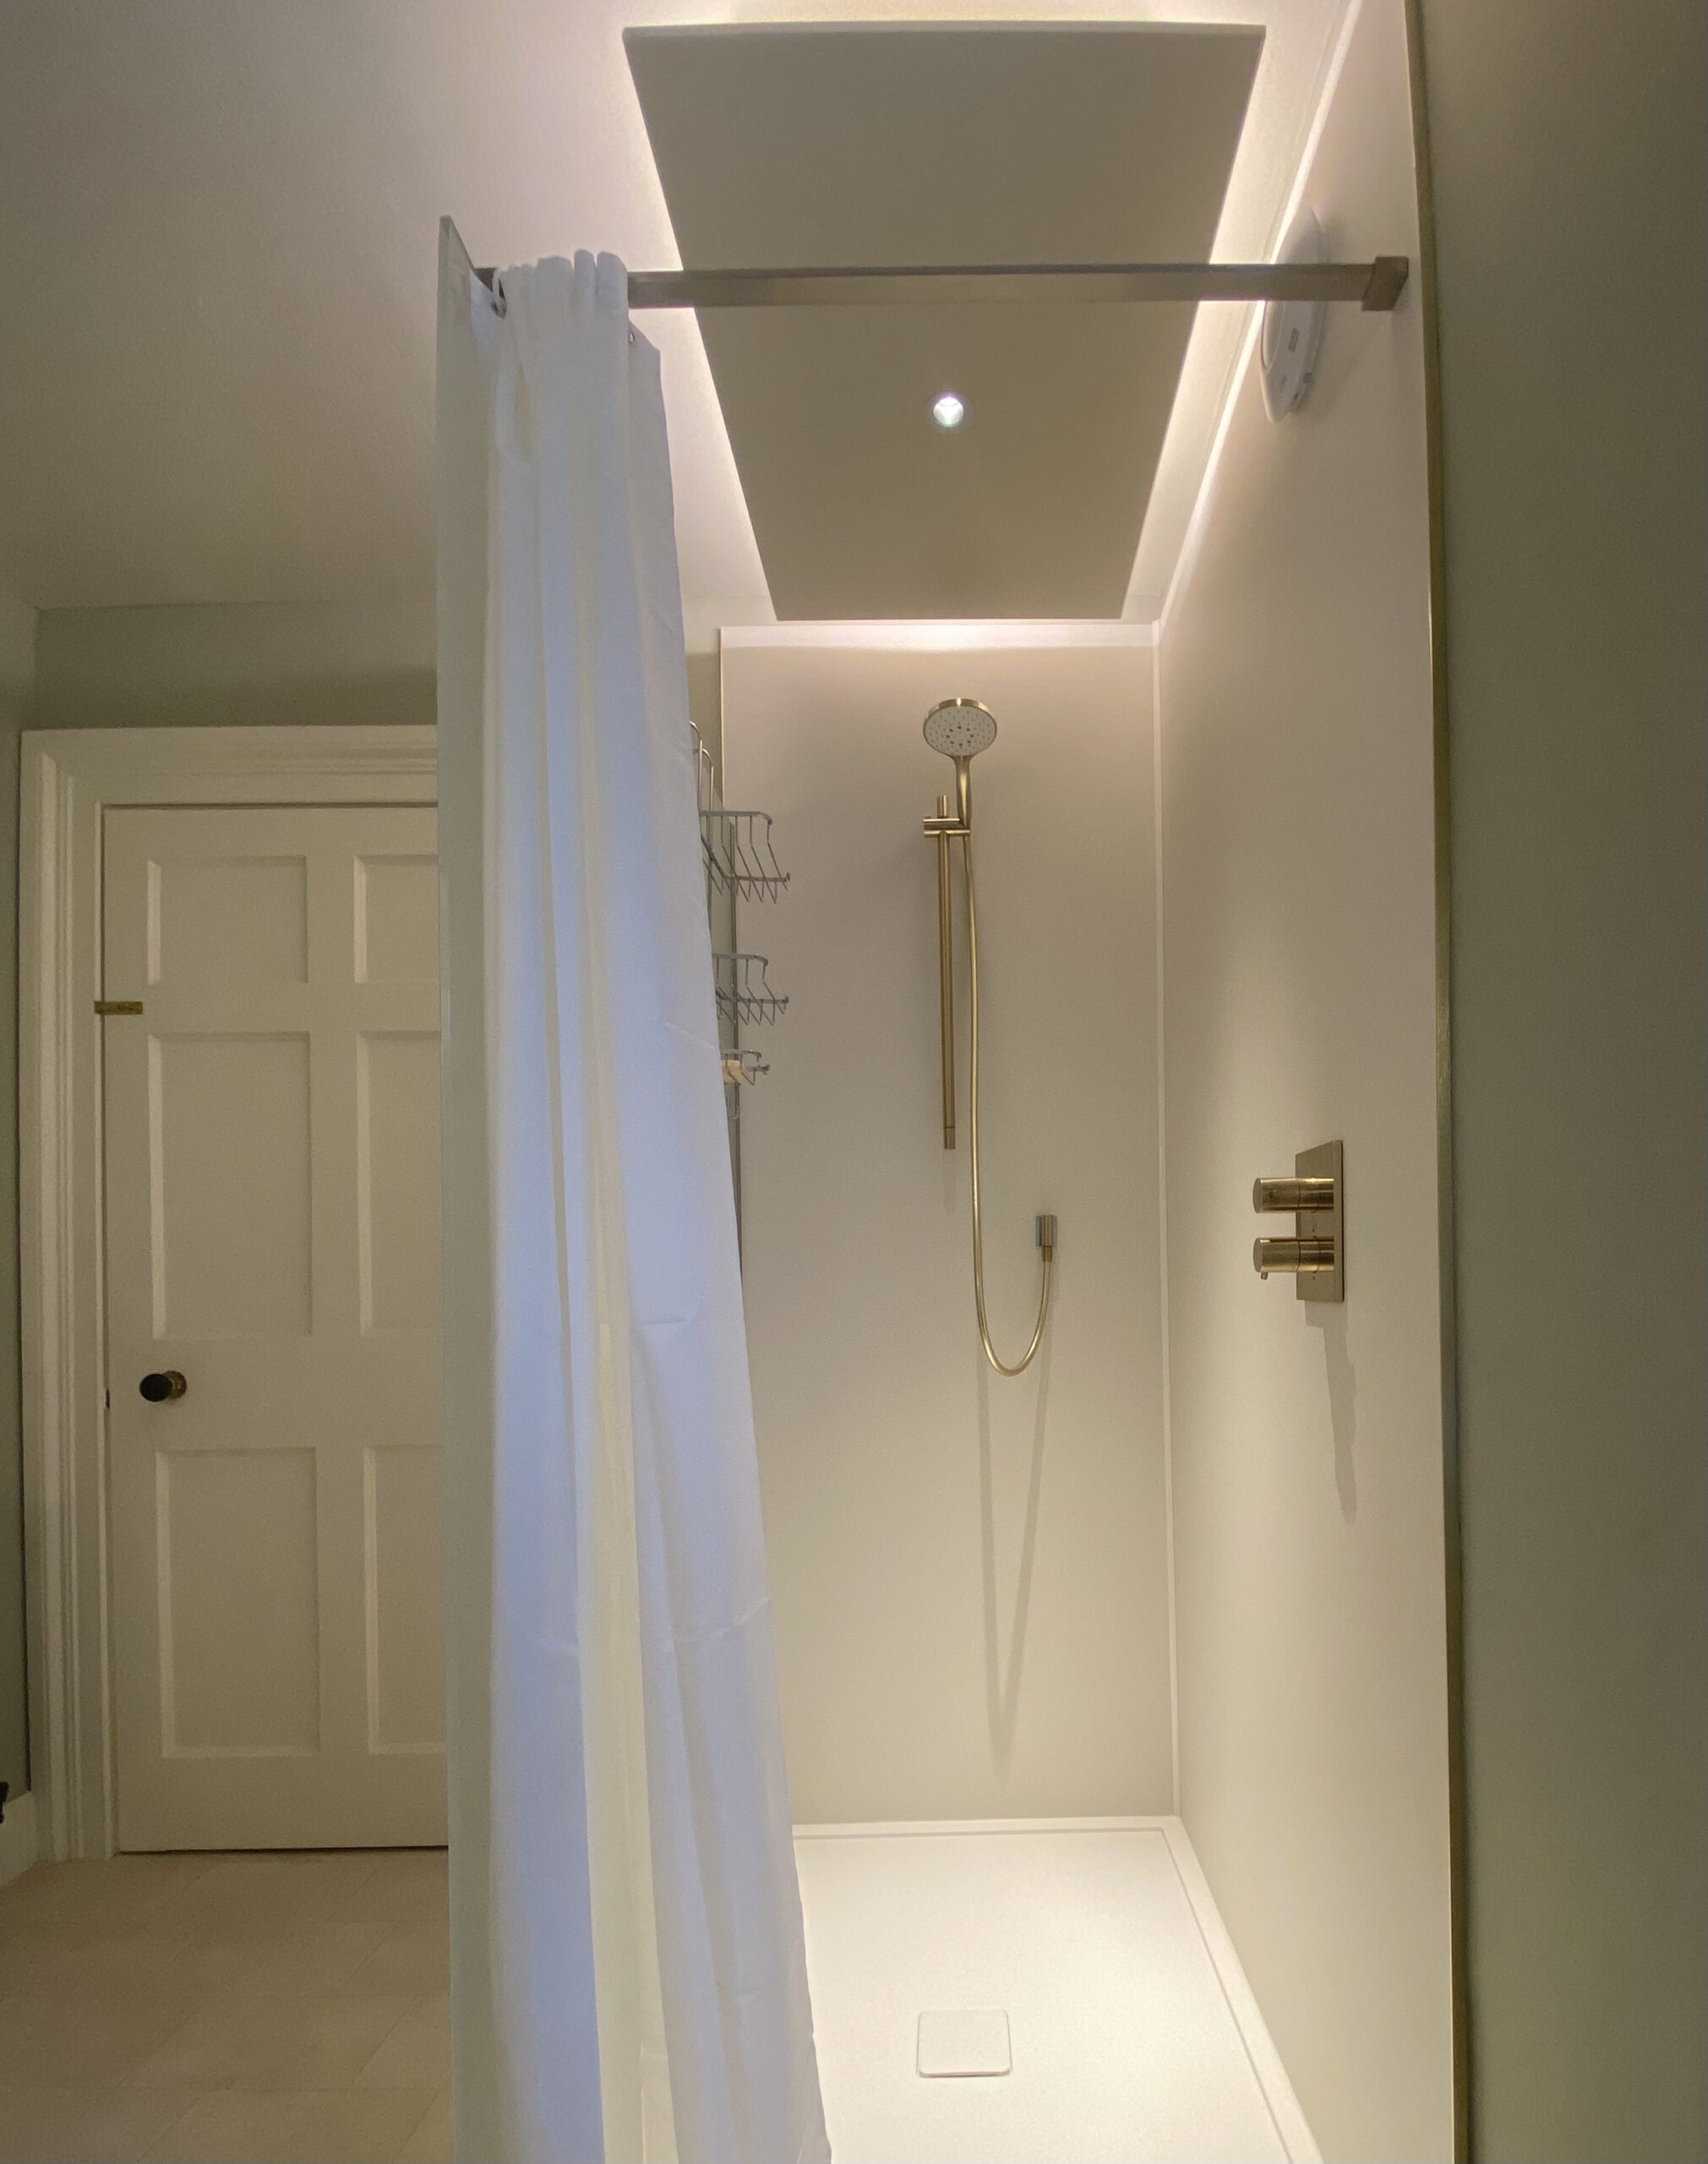 5 tips for lighting a bathroom. A photo of an illuminated modern white shower cubicle in a domestic bathroom, specialist lighting designer